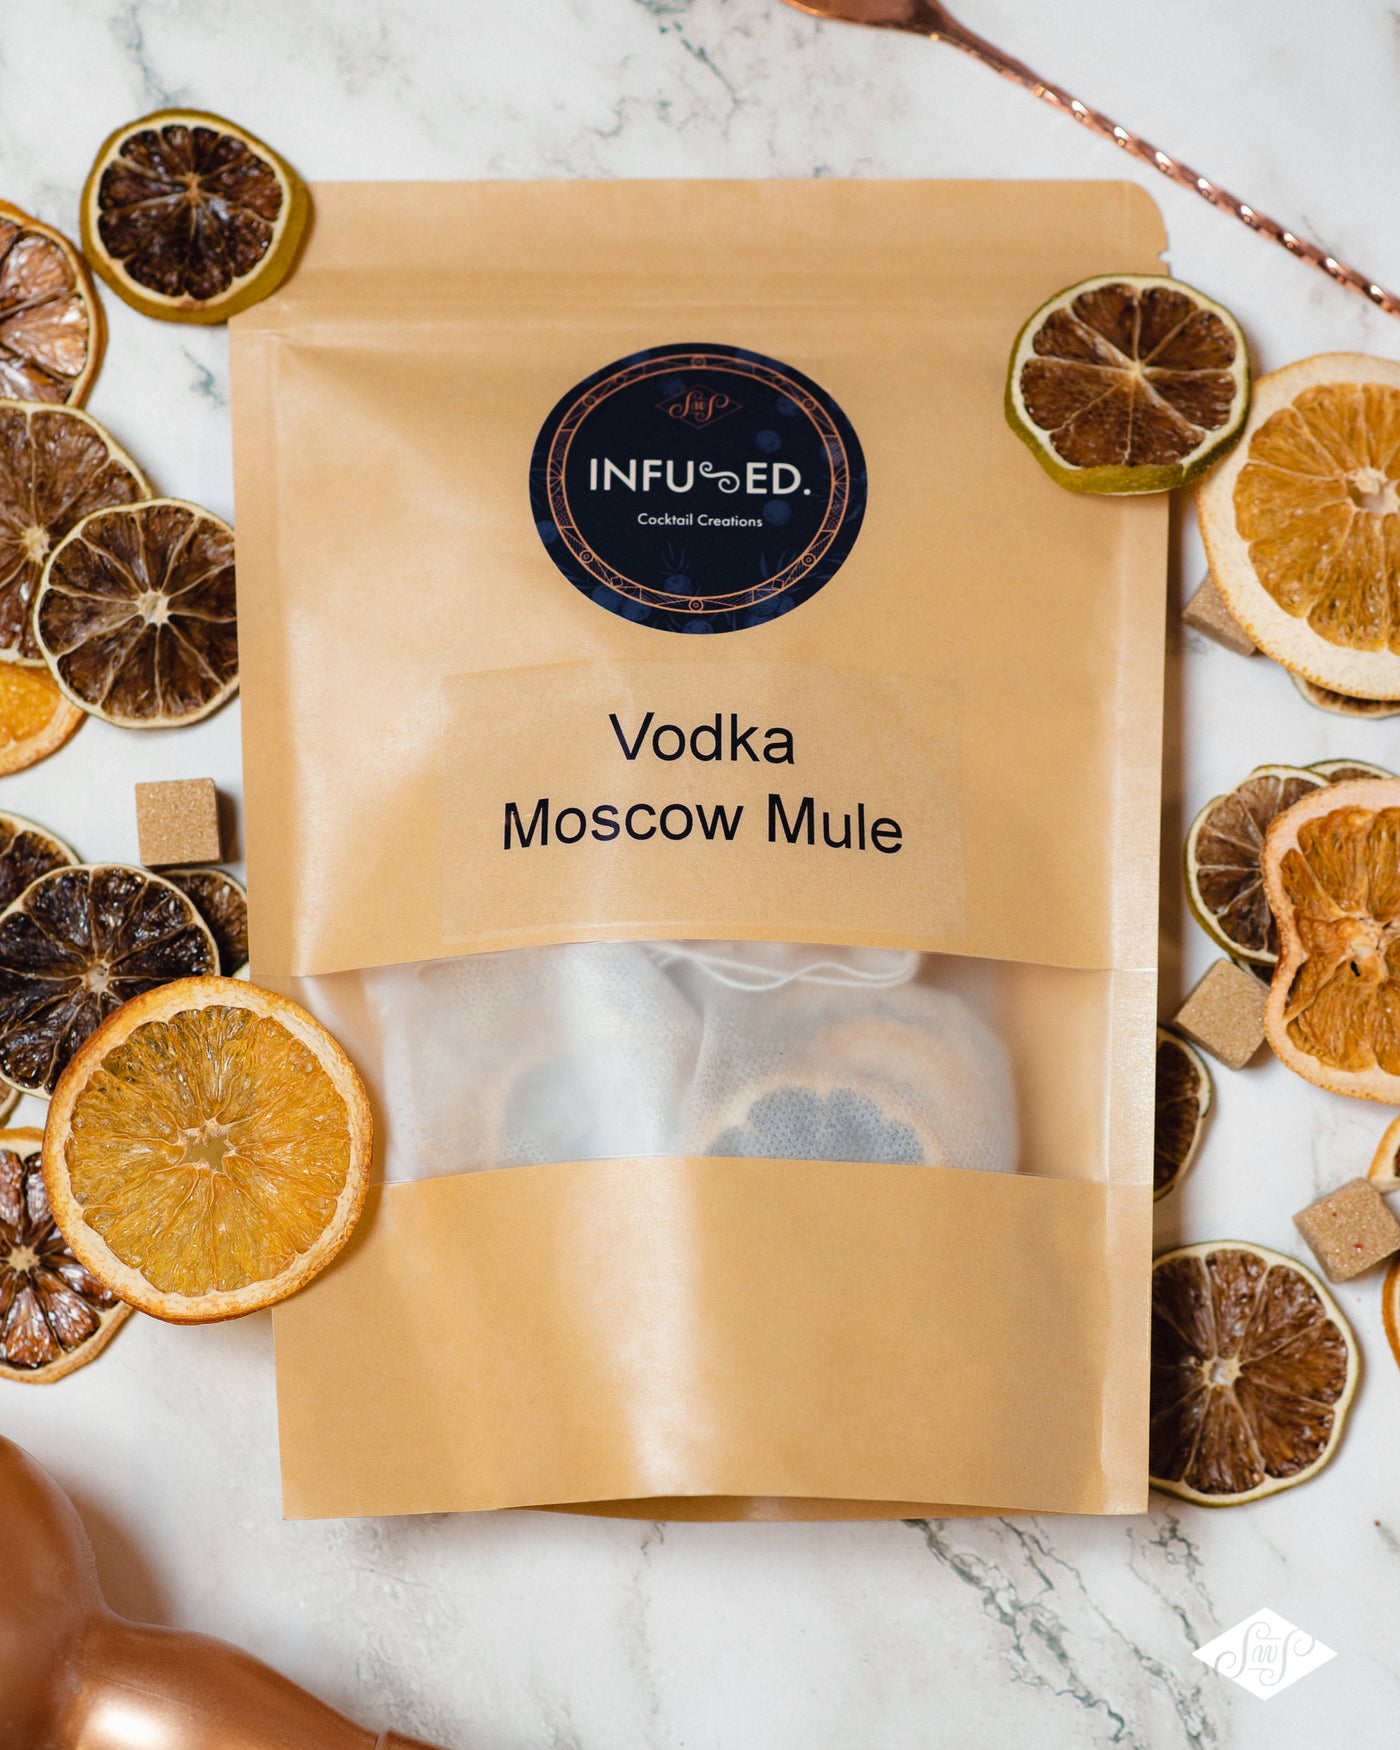 Vodka Moscow Mule